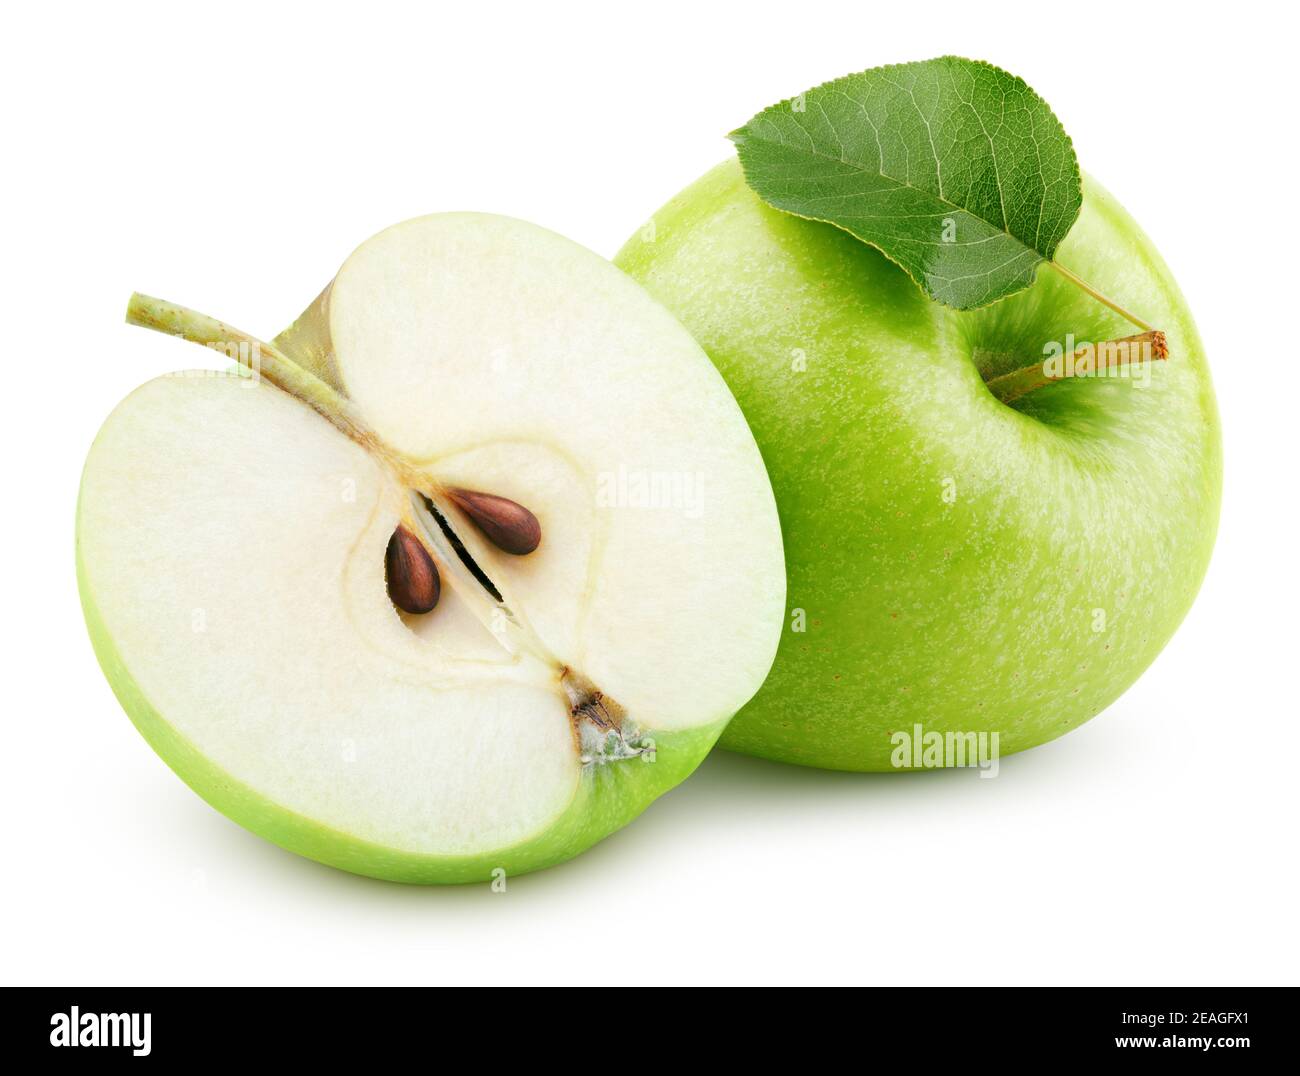 Ripe green apple fruit with half and green apple leaf isolated on white background. Green apples with clipping path. Full Depth of Field Stock Photo